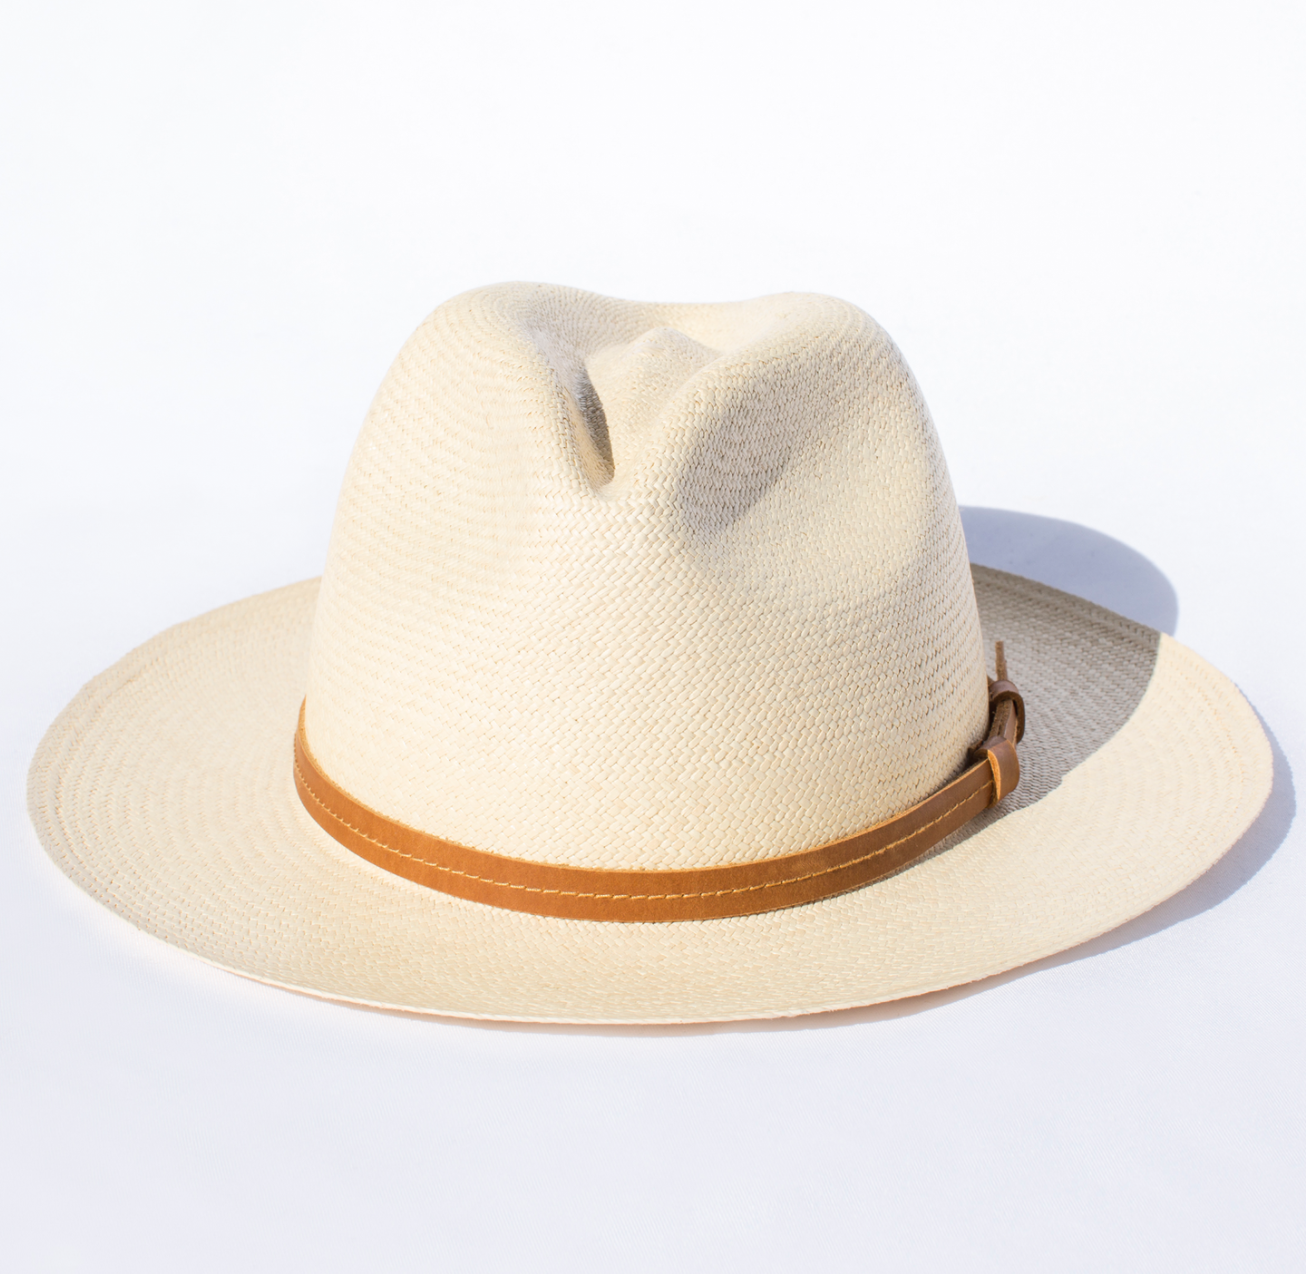 Elegancia Tropical Hats- Classic Natural Panama Hat with Leather Headband - Unisex